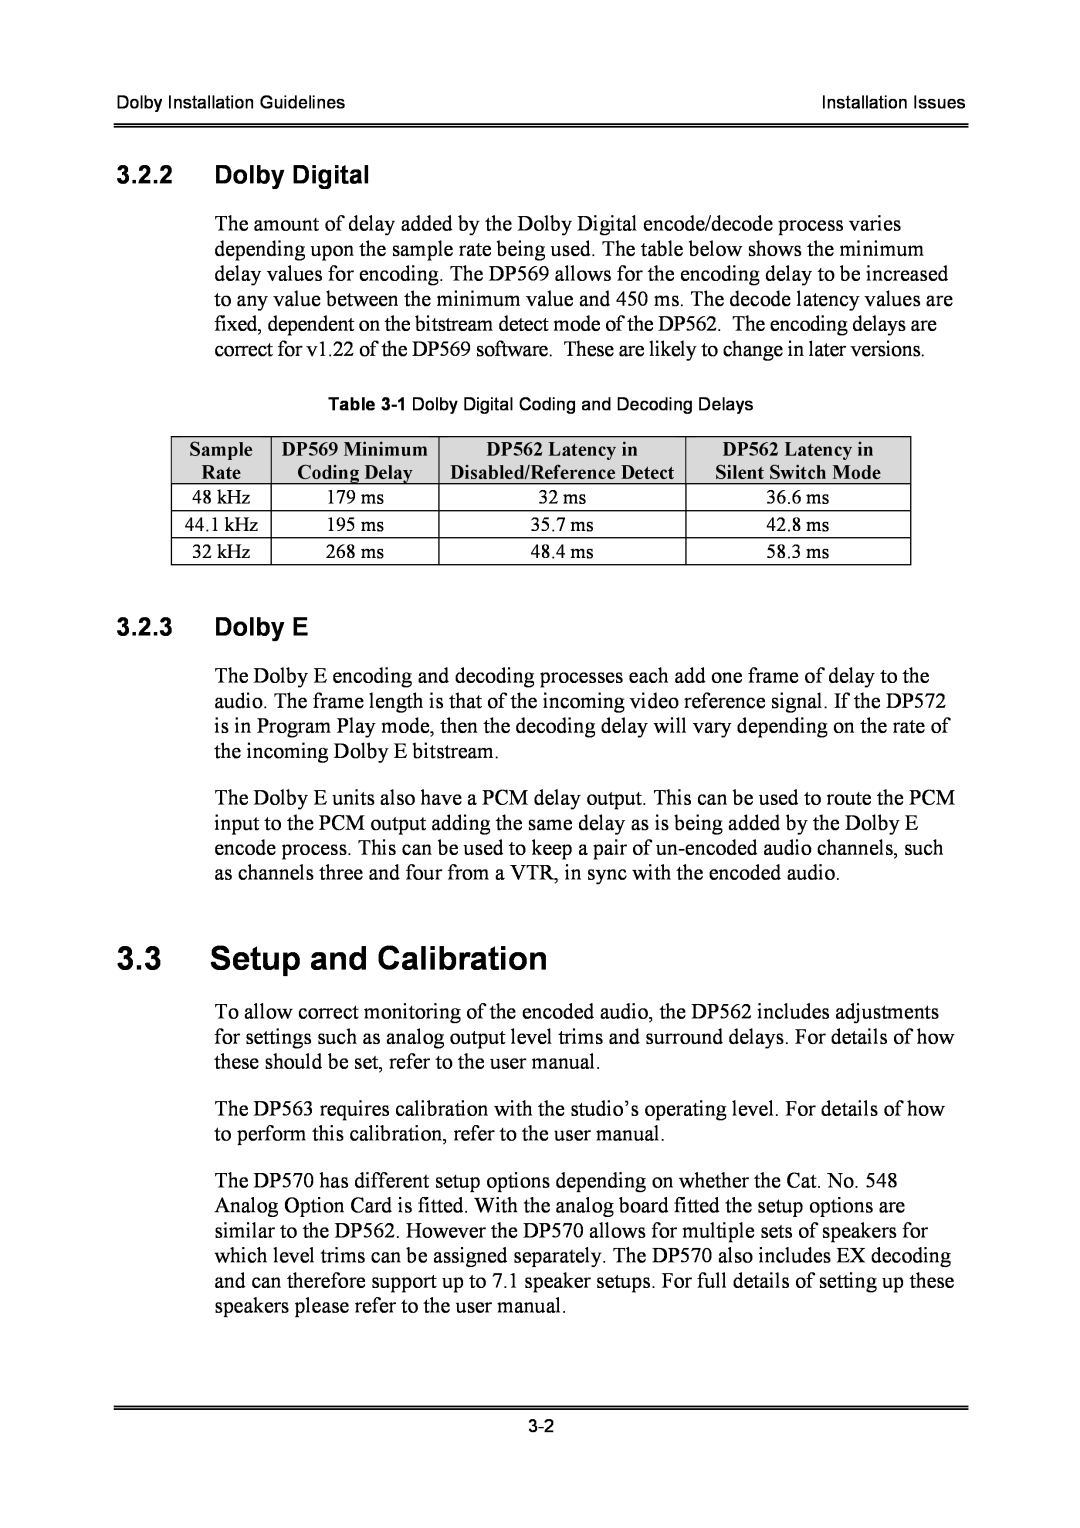 Dolby Laboratories S01/13621 manual 3.3Setup and Calibration, 3.2.2Dolby Digital, 3.2.3Dolby E 